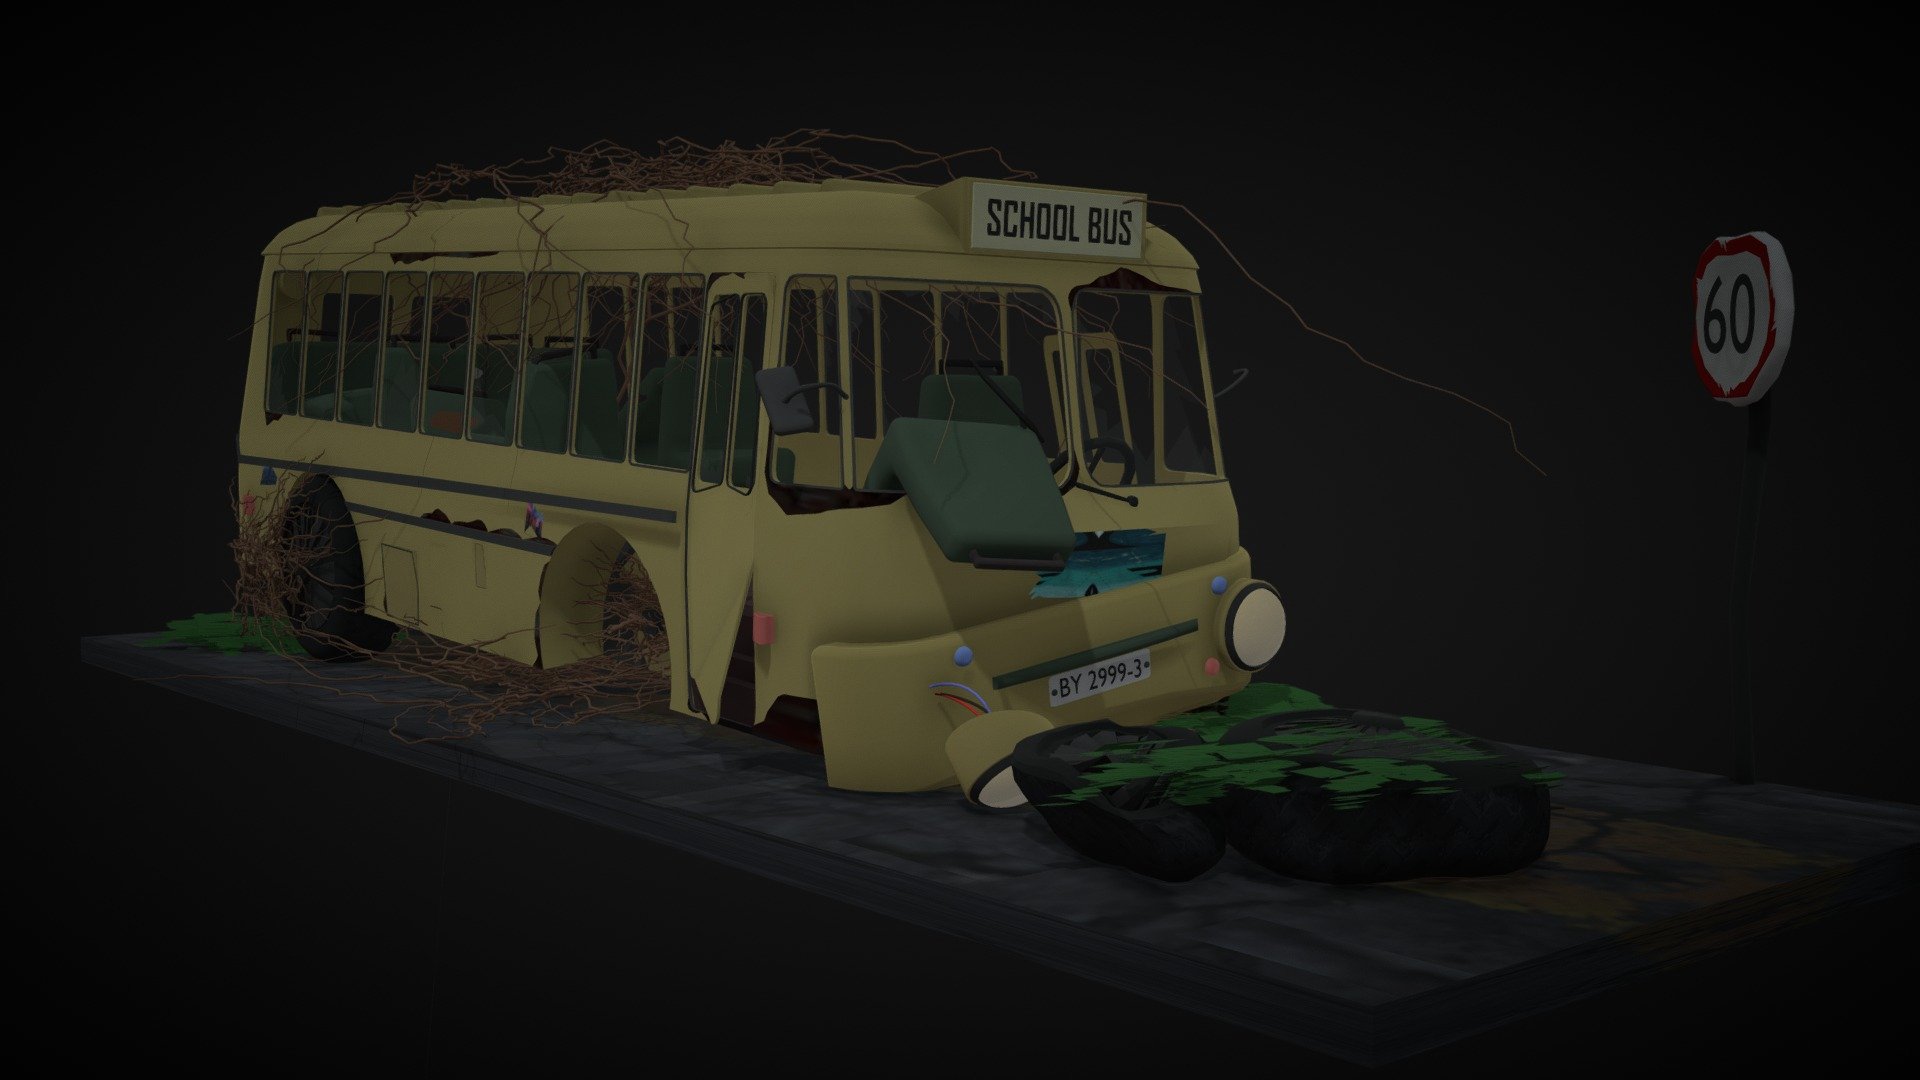 crashed school bus - smashed bus - Download Free 3D model by shkatulochka (@kycokcaxara) 3d model